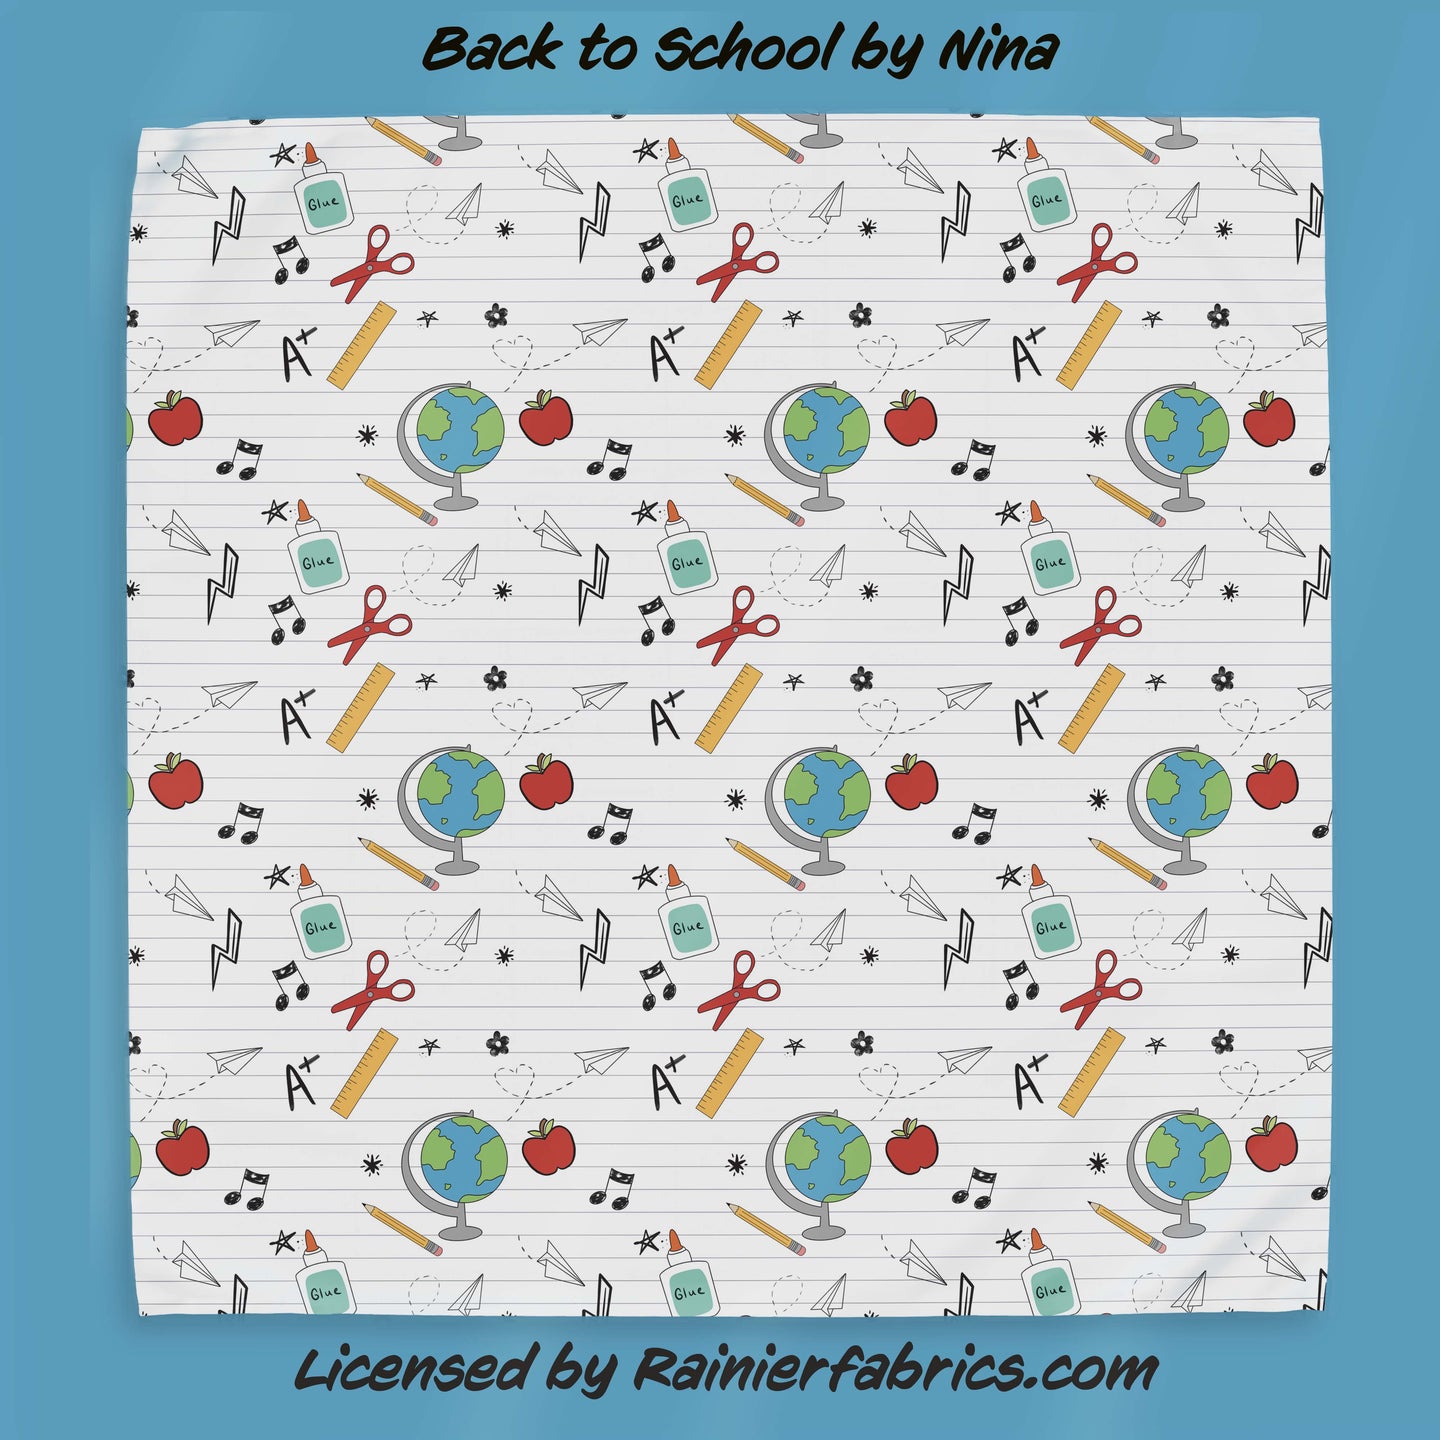 Back to School Collection - by Nina - Rainier Fabrics Exclusive! - 2-5 day TAT - Order by 1/2 yard; Blankets and towels available too